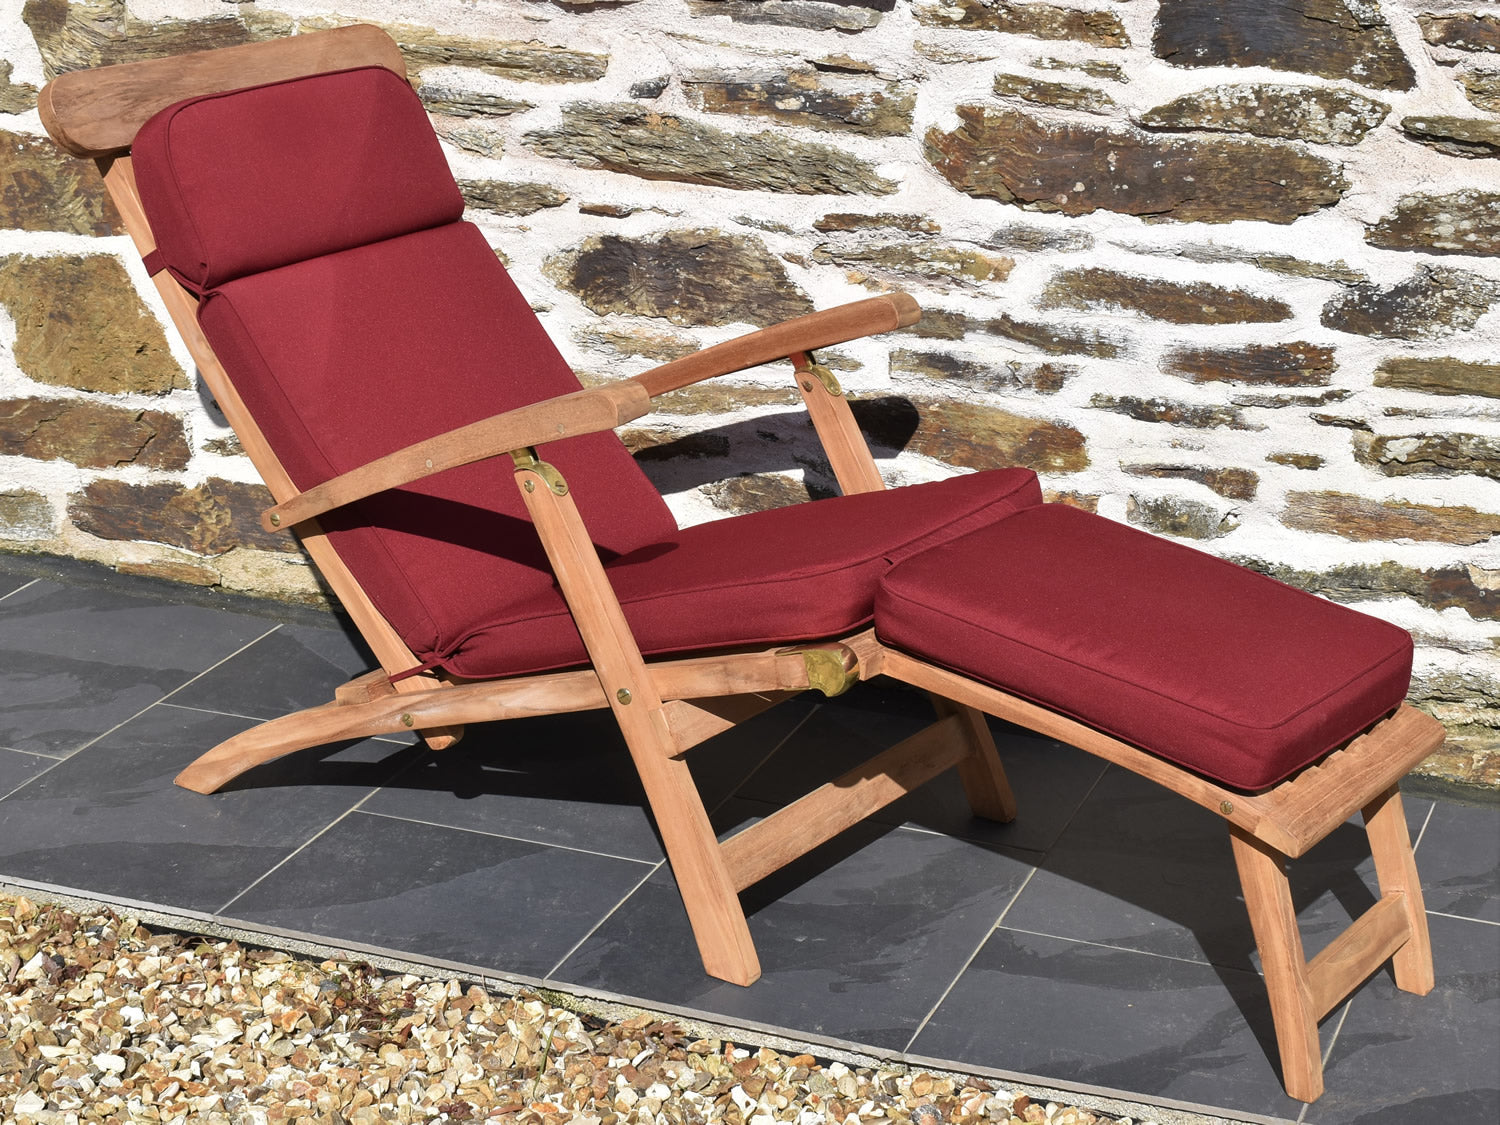 traditional outdoor steamer recliner chair cushion in burgundy red colour